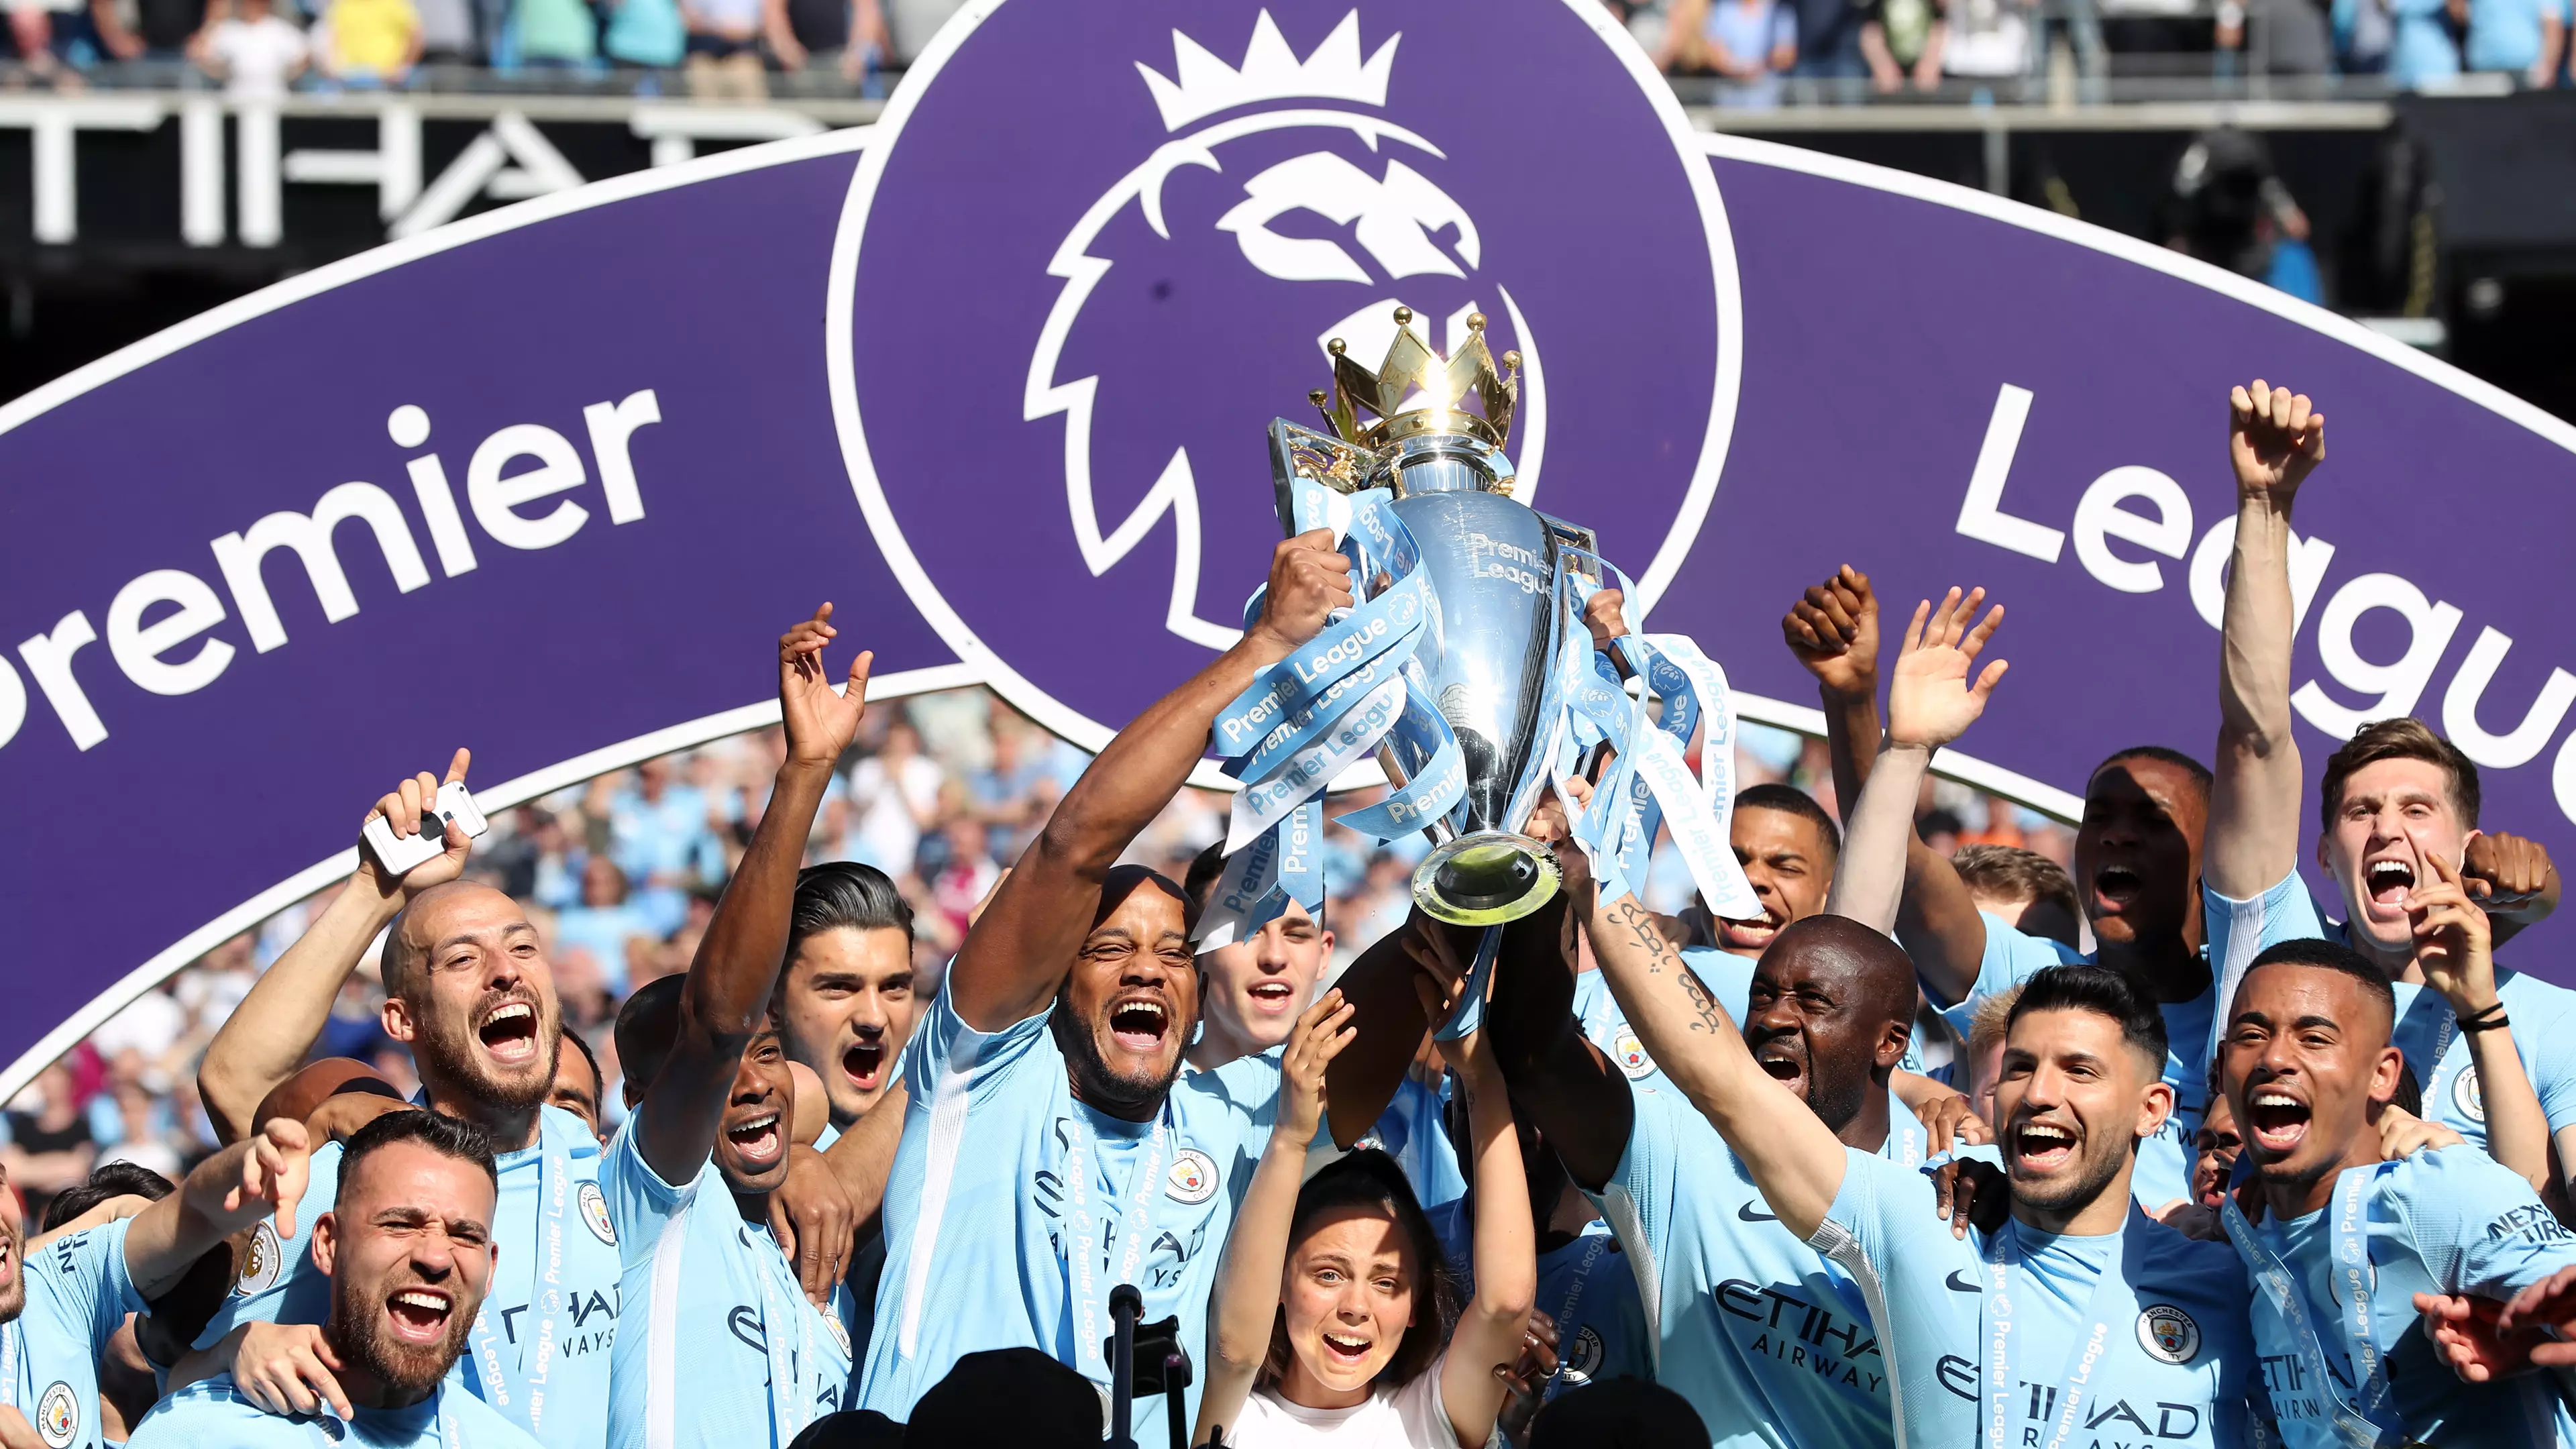 Super Computer Predicts The Final Premier League Table And It's Very Interesting 